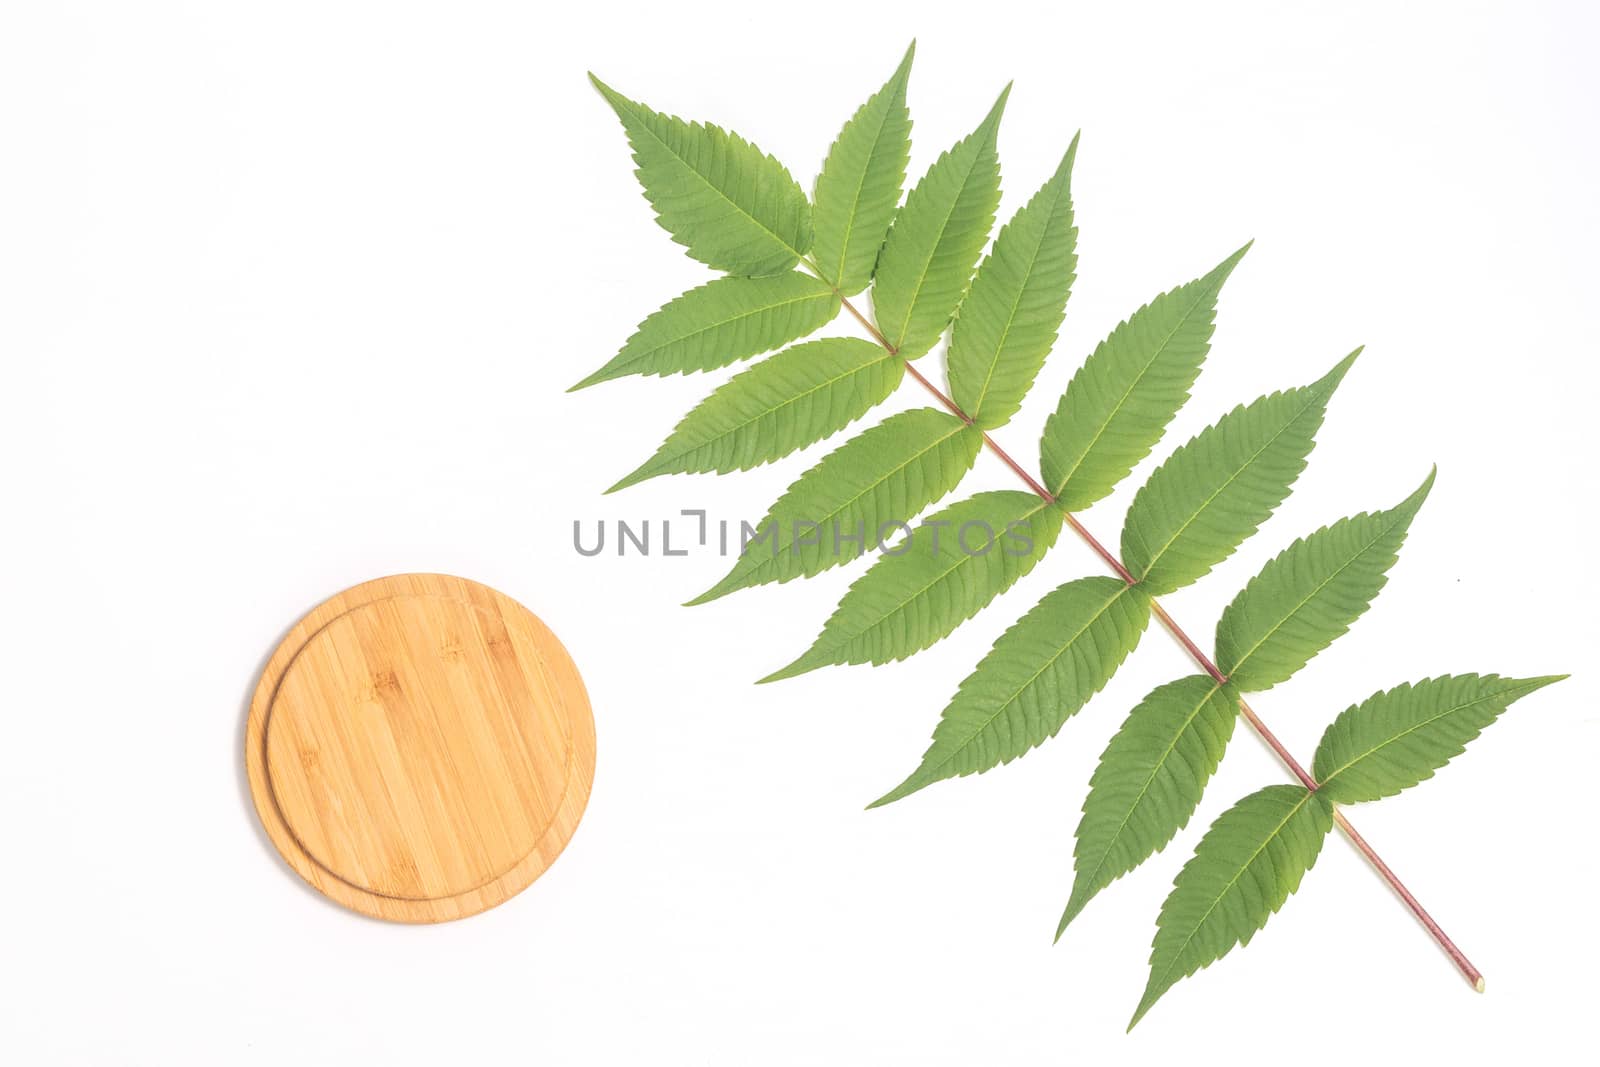 Bamboo Cutting Board with green leaf white whalnu on white background. Eco friendly housekeeping concept